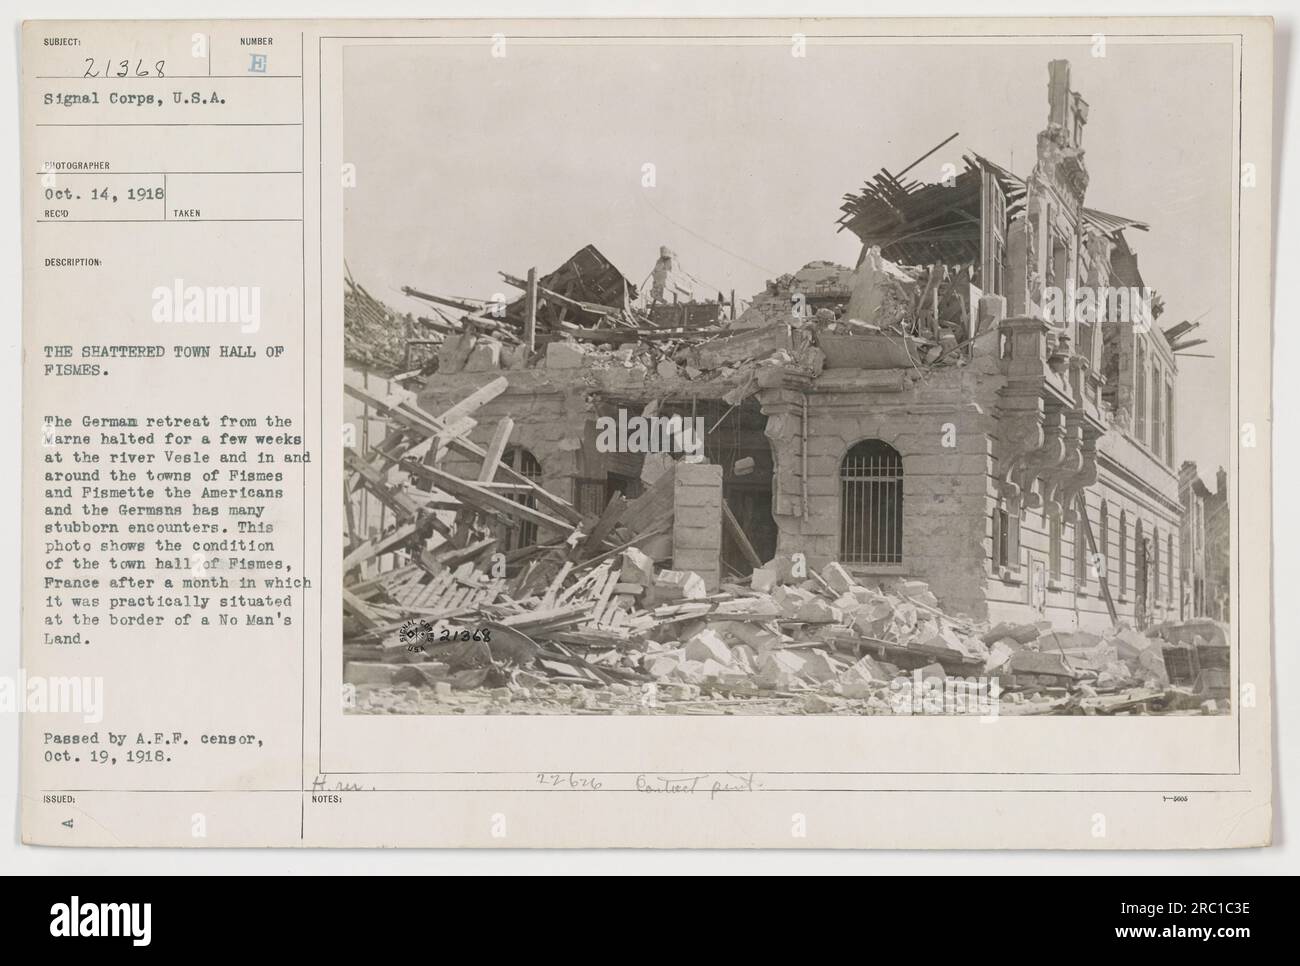 The image depicts the ruined town hall of Fismes, France, during World War I. The German retreat from the Marne resulted in fierce battles in and around the town. The photo portrays the damaged condition of the town hall after being in close proximity to the No Man's Land for a month. Stock Photo